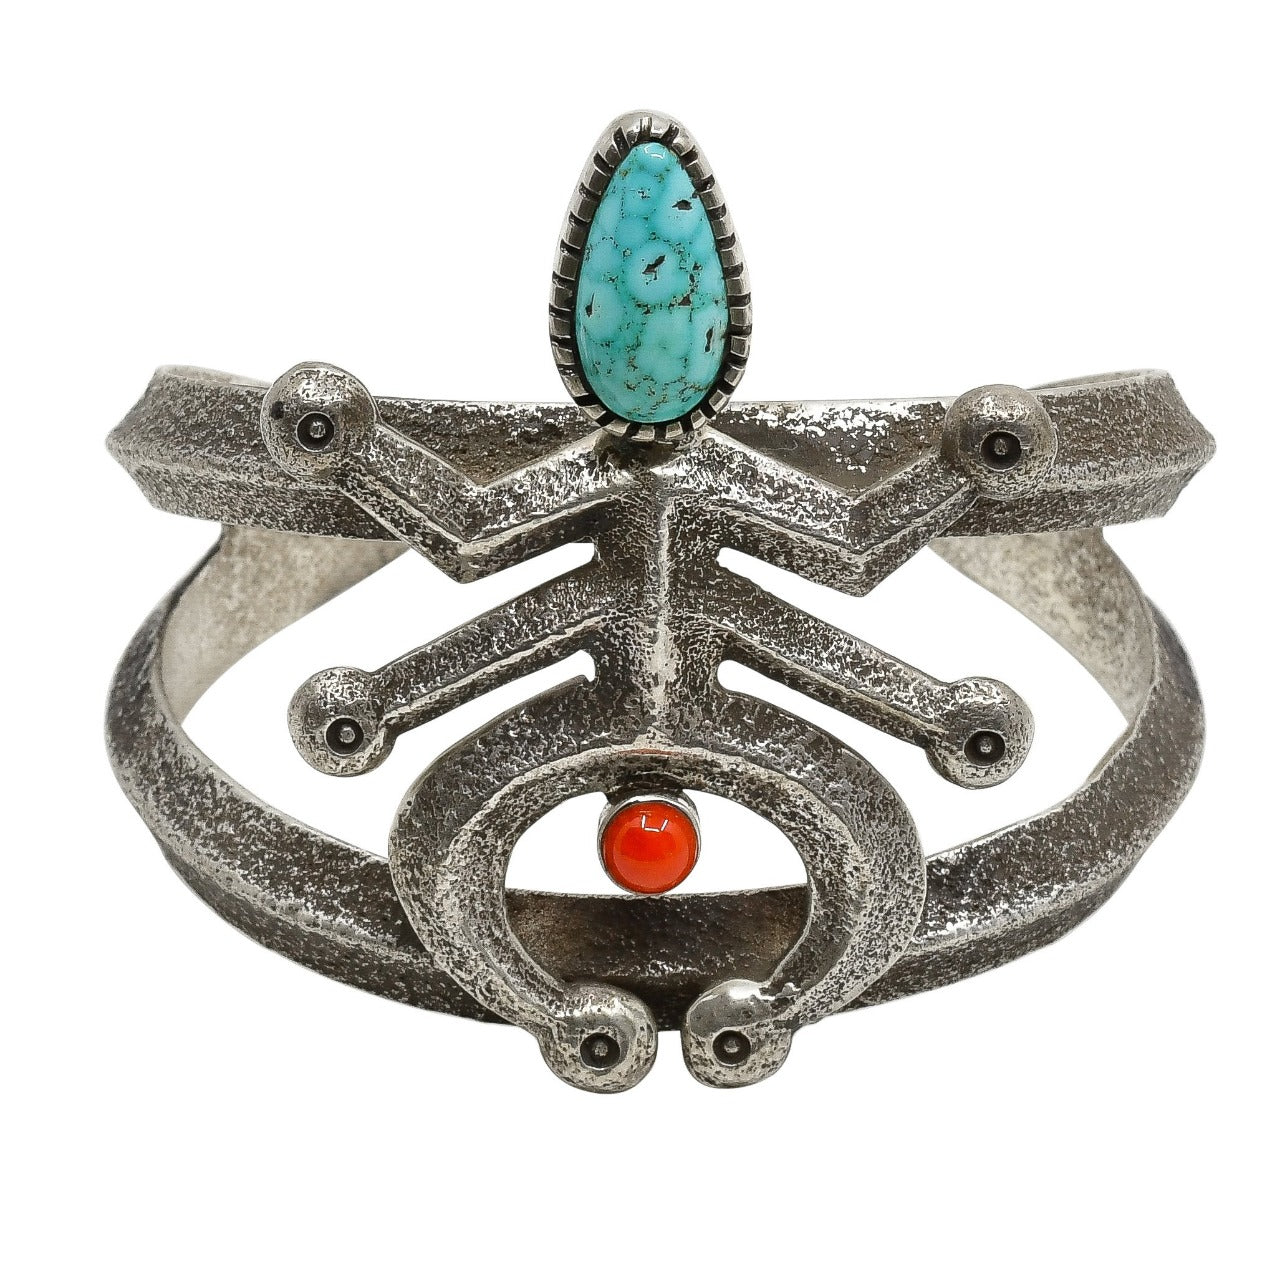 Edison Cummings Bracelet of Turquoise and Coral Horny Toad - Turquoise & Tufa